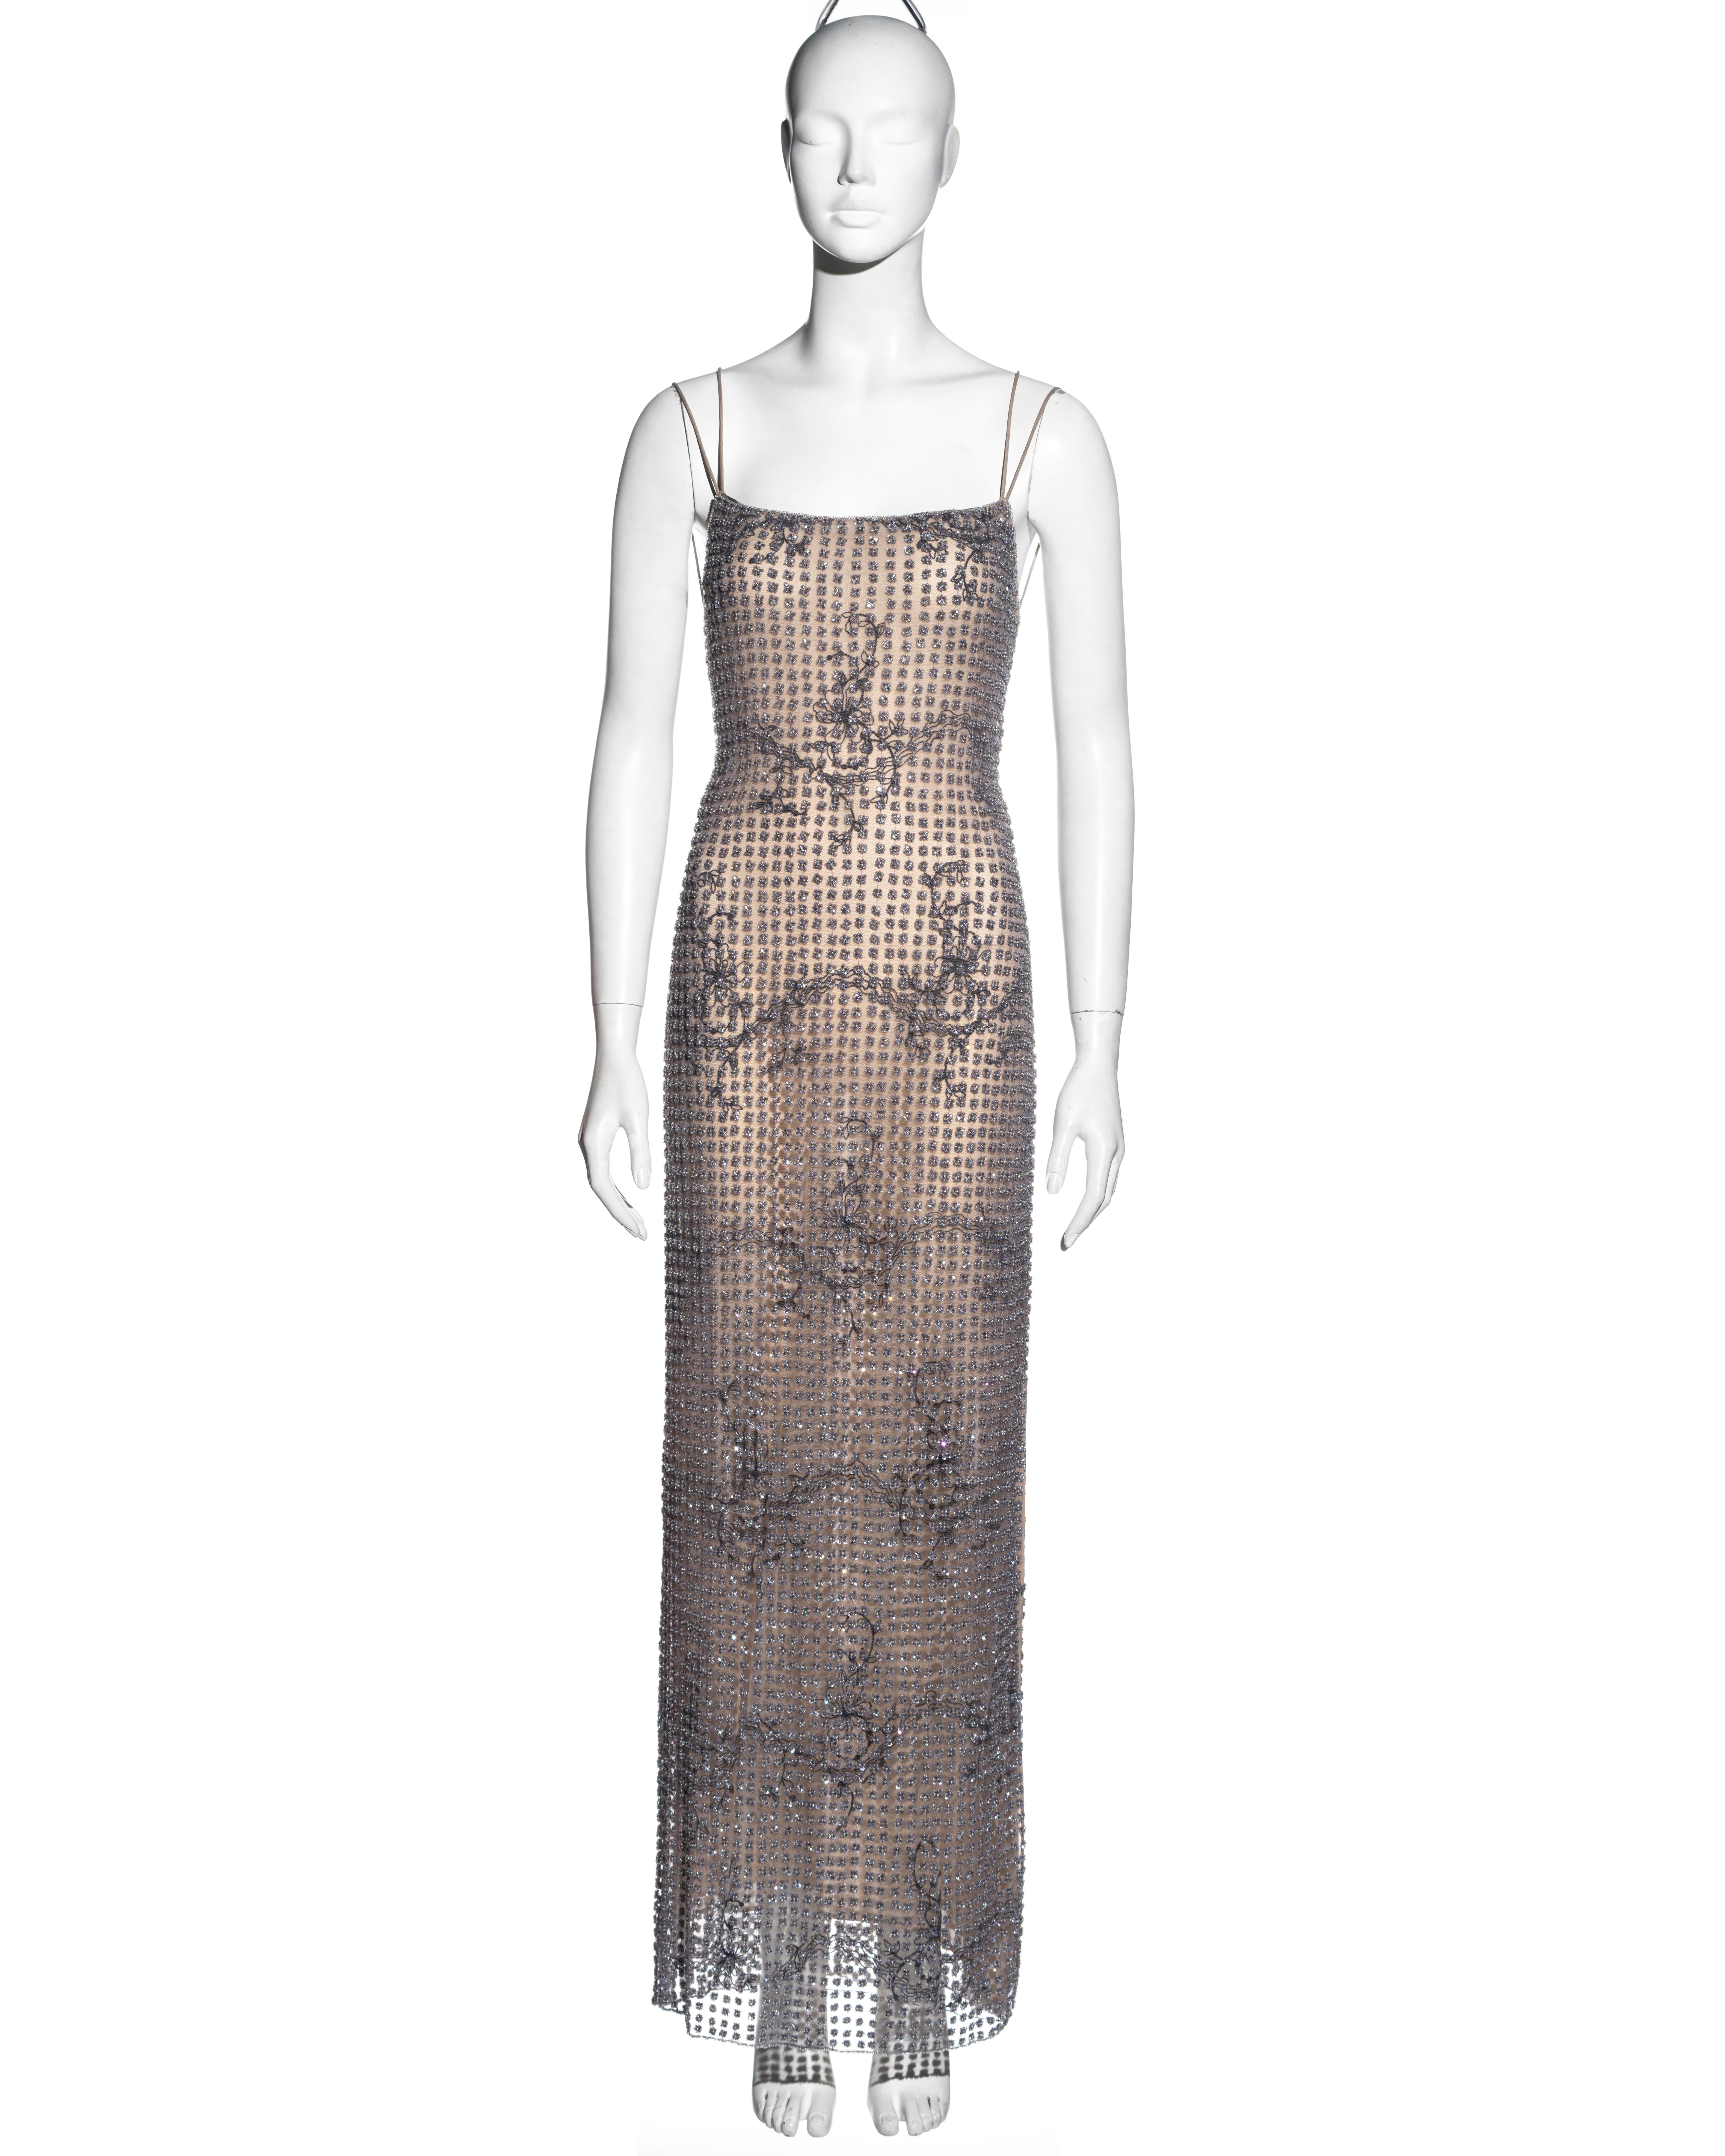 ▪ Giorgio Armani lavender beaded tulle evening dress
▪ Outer tulle layer adorned all over with small beaded flowers of bugle beads and sequins 
▪ Nude lining with embroidery of flowers and vines 
▪ 4 spaghetti straps
▪ Heavyweight 
▪ IT 40 - FR 36 -